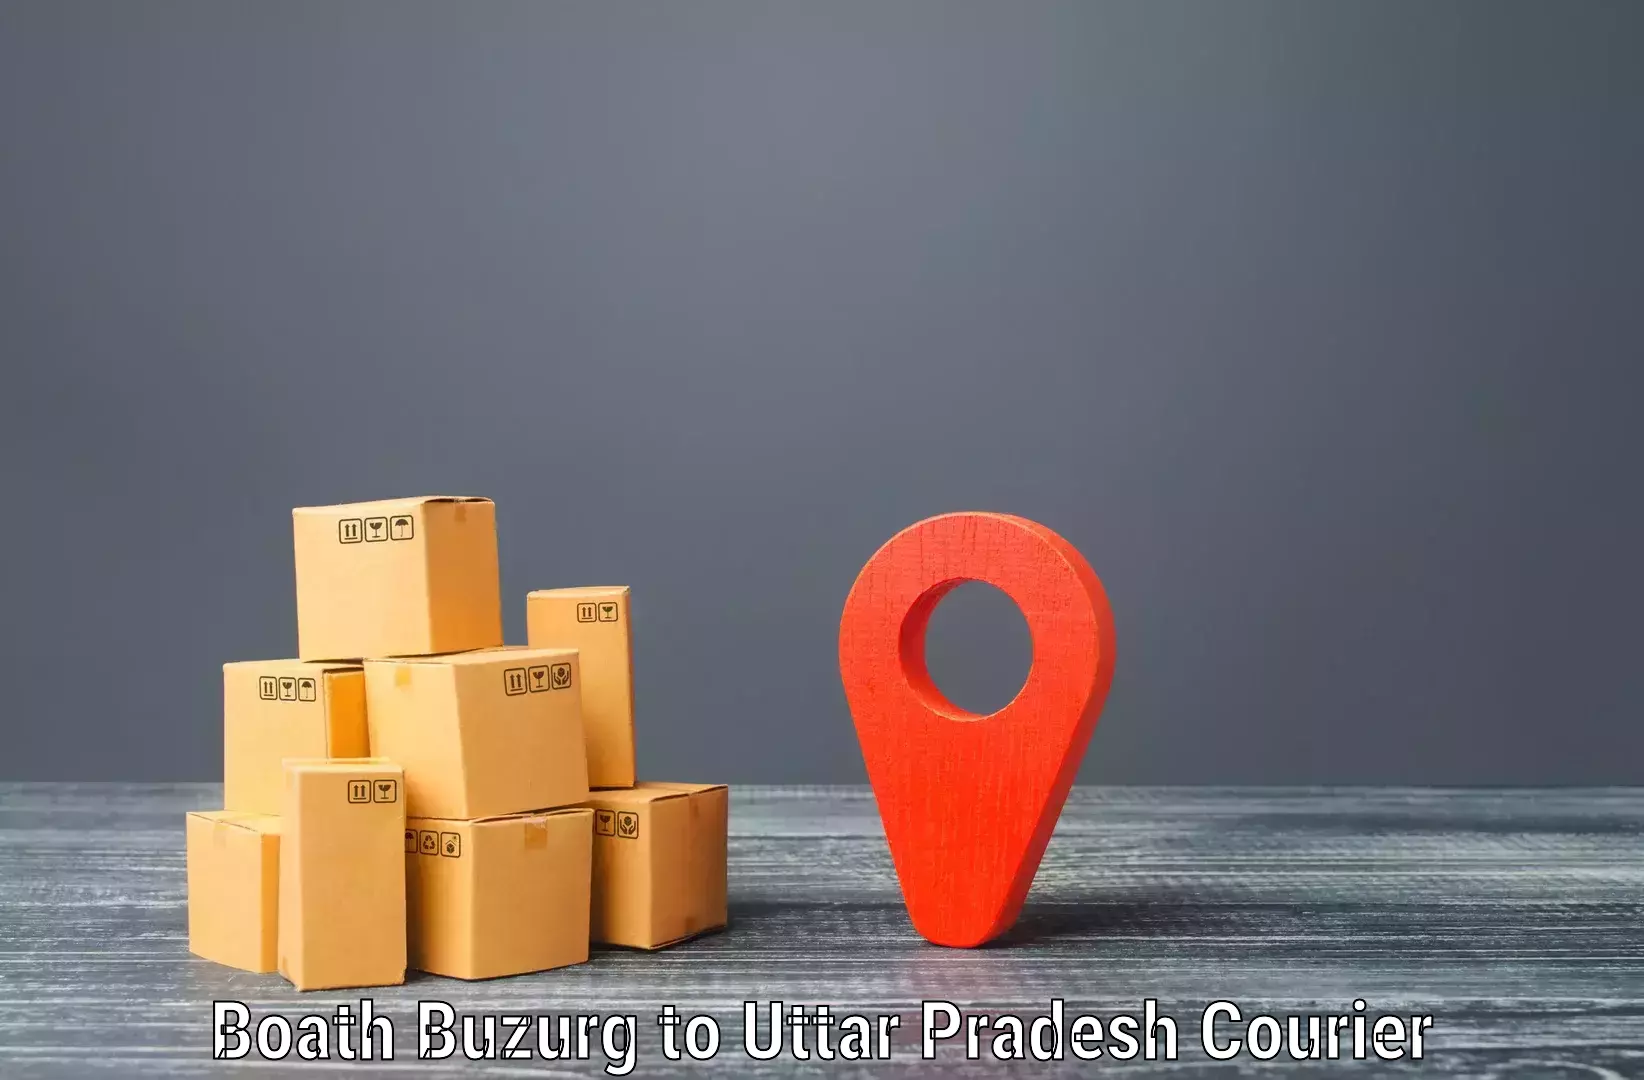 Cost-effective shipping solutions Boath Buzurg to Dostpur